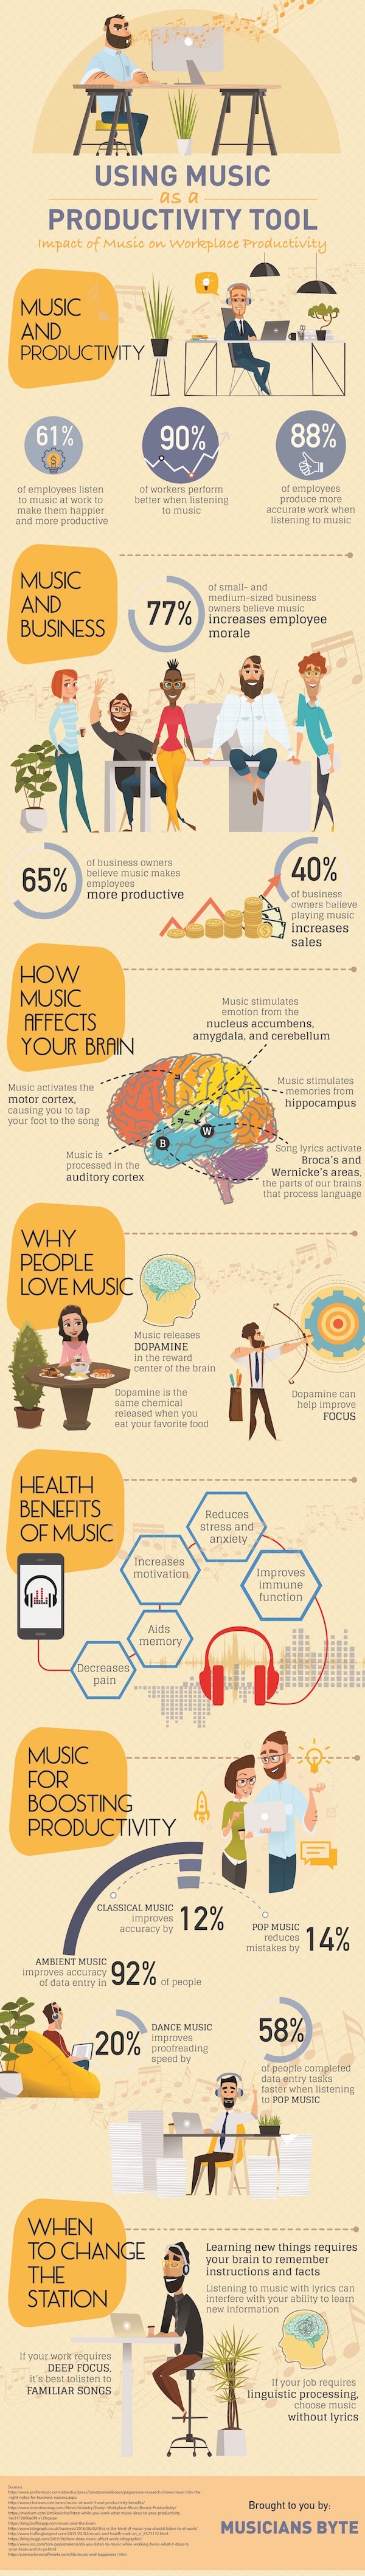 7 Ways Music for the Office Can Make Employees More Productive | Cloud ...